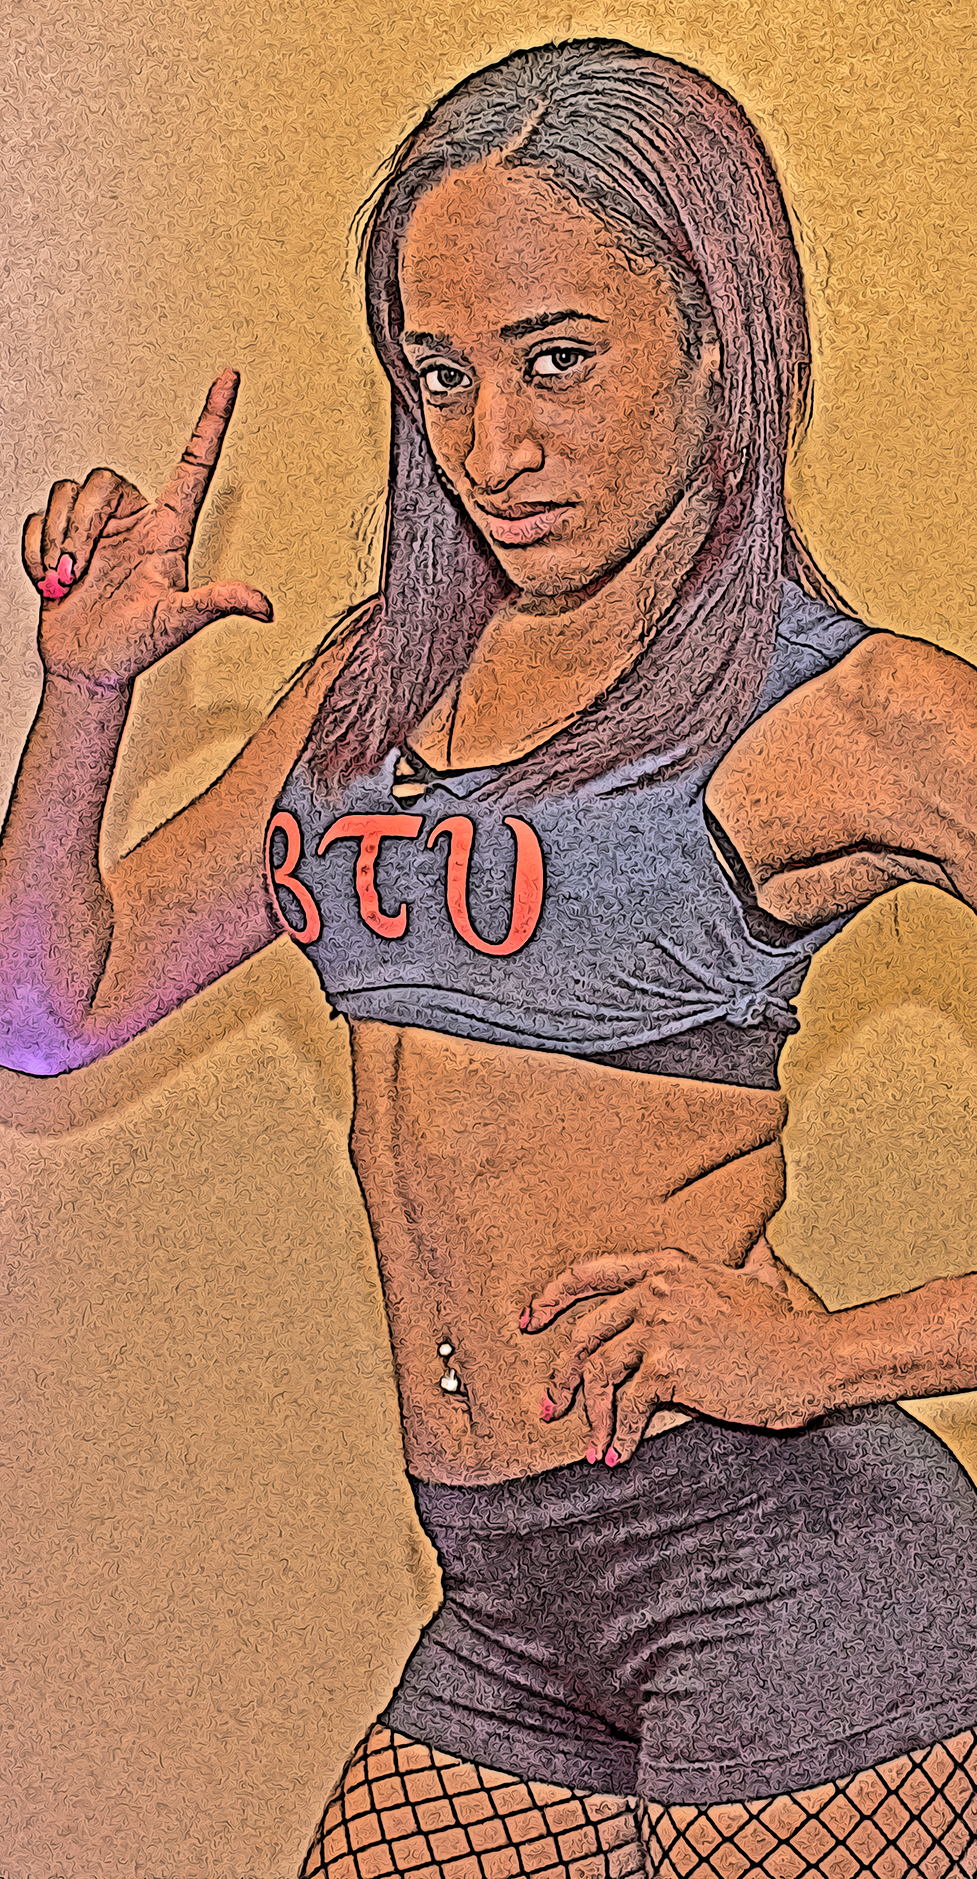 a professional female wrestler named B T U in Yonkers New York on 1 May 2016